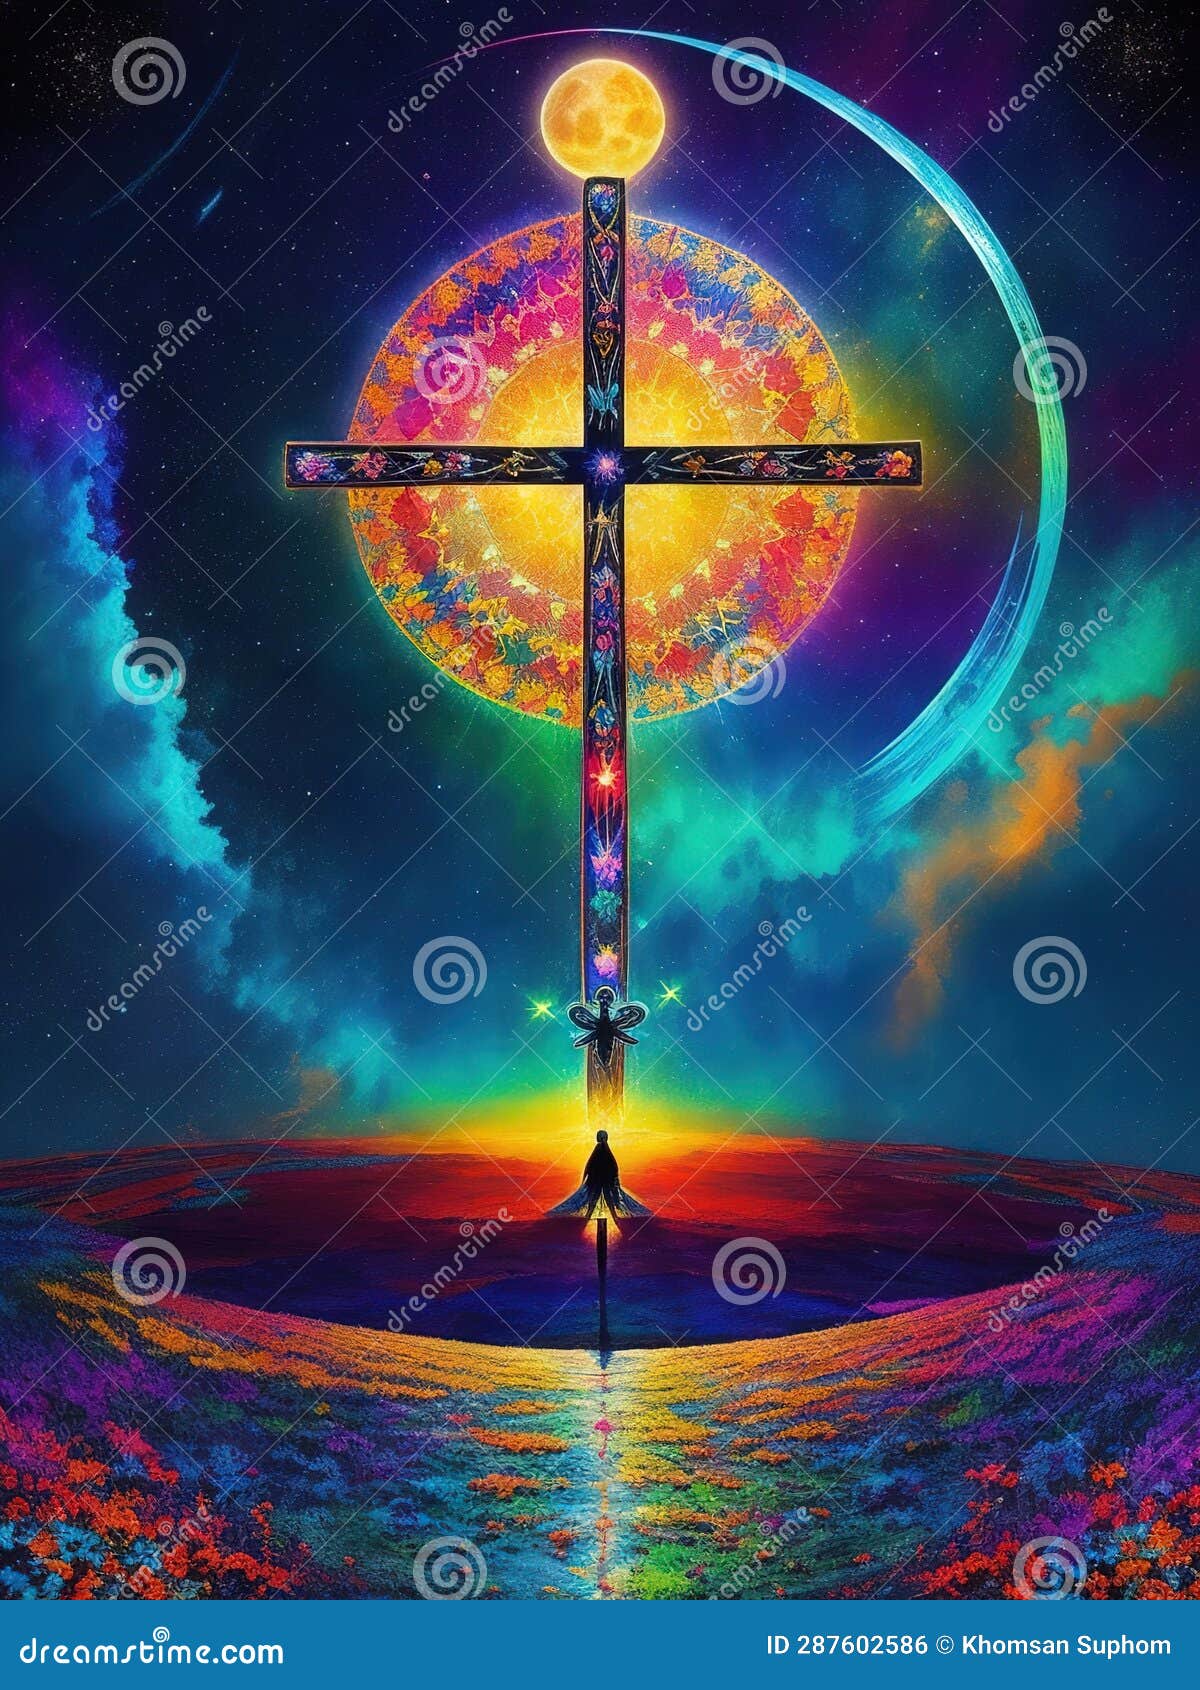 social media happy easter for christianity in portuguese crucifix colourful electric lightning  style